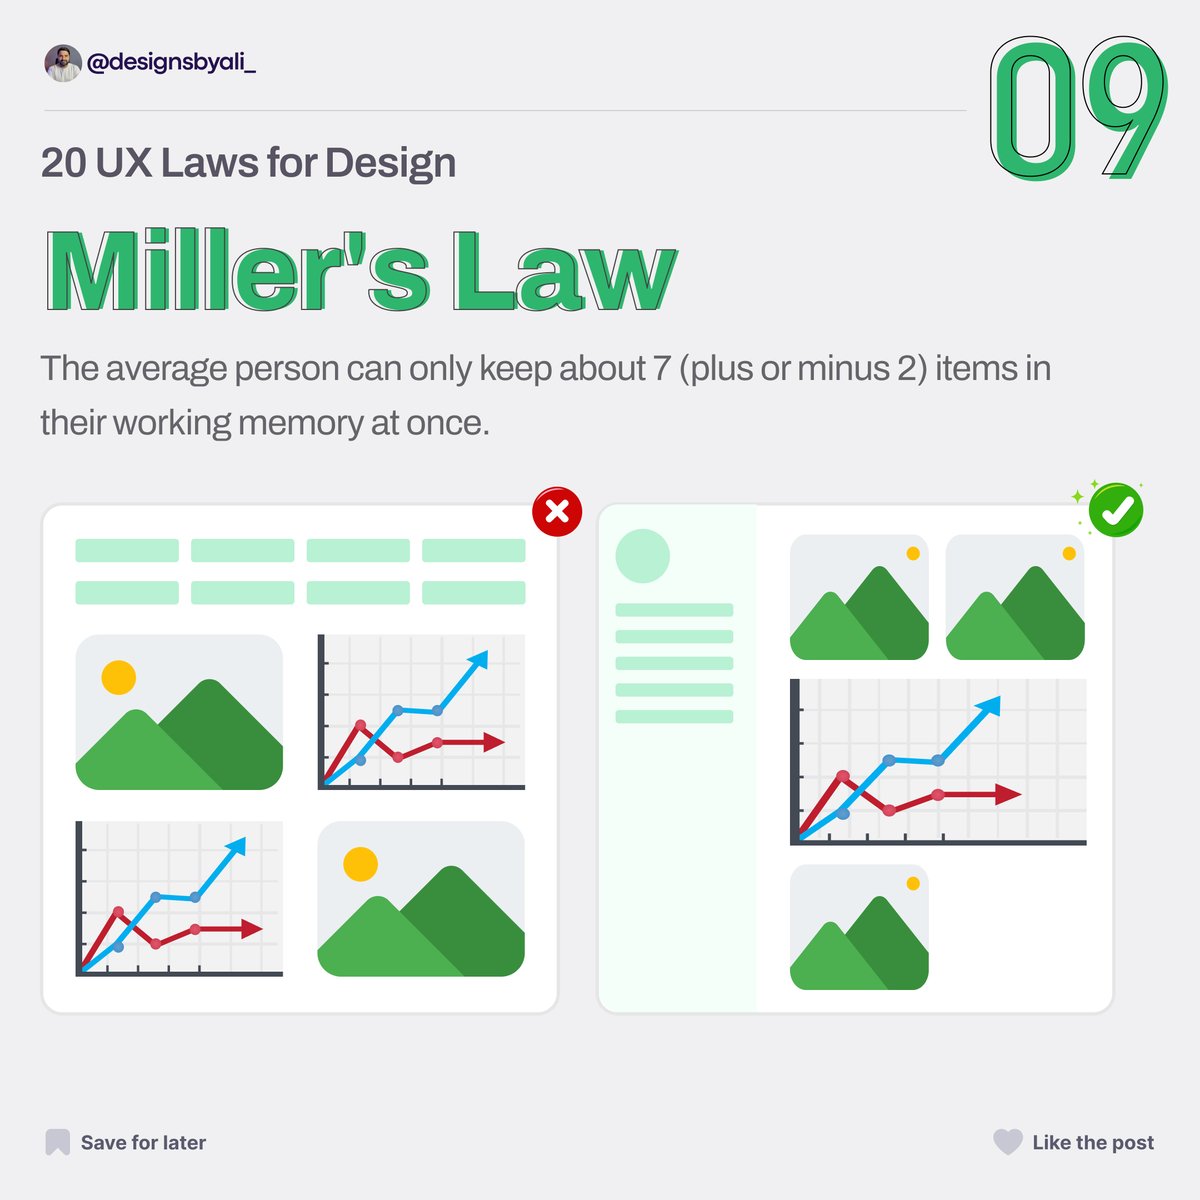 Top UX Laws: Miller's Law 🧠
The average person can only keep about 7 (plus or minus 2) items in their working memory at once.

#MillersLaw #MemoryCapacity #WorkingMemory #Cognition #Psychology #MemoryLimits #designsbyali #uidesigner #uiux #uxlaws